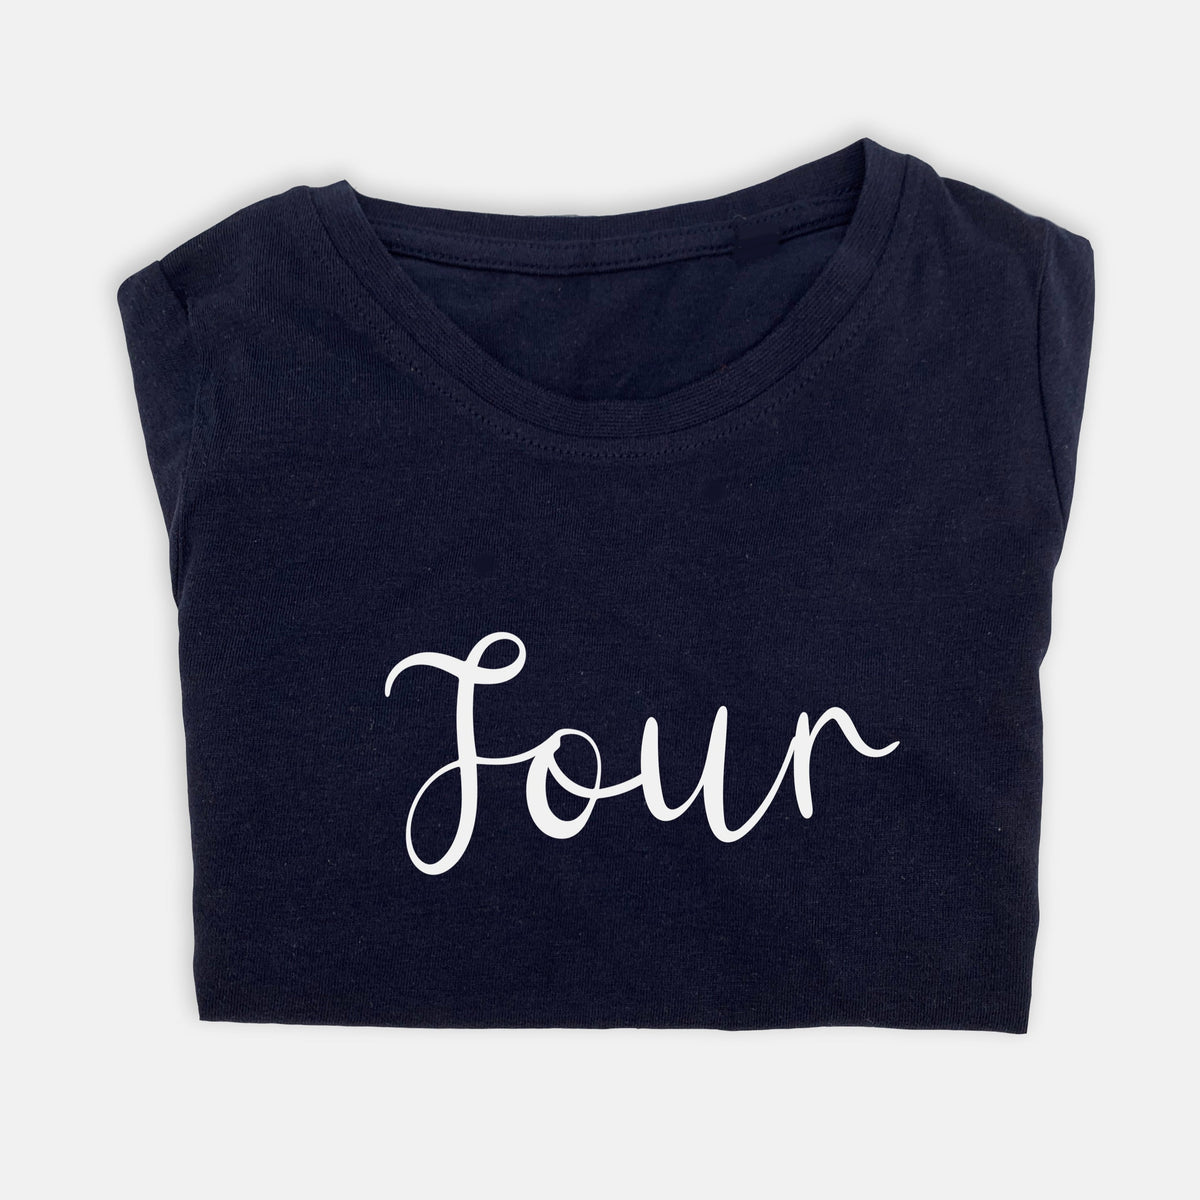 Milestone FOUR T-shirt - The Perfect Birthday outfit for a FOUR year old